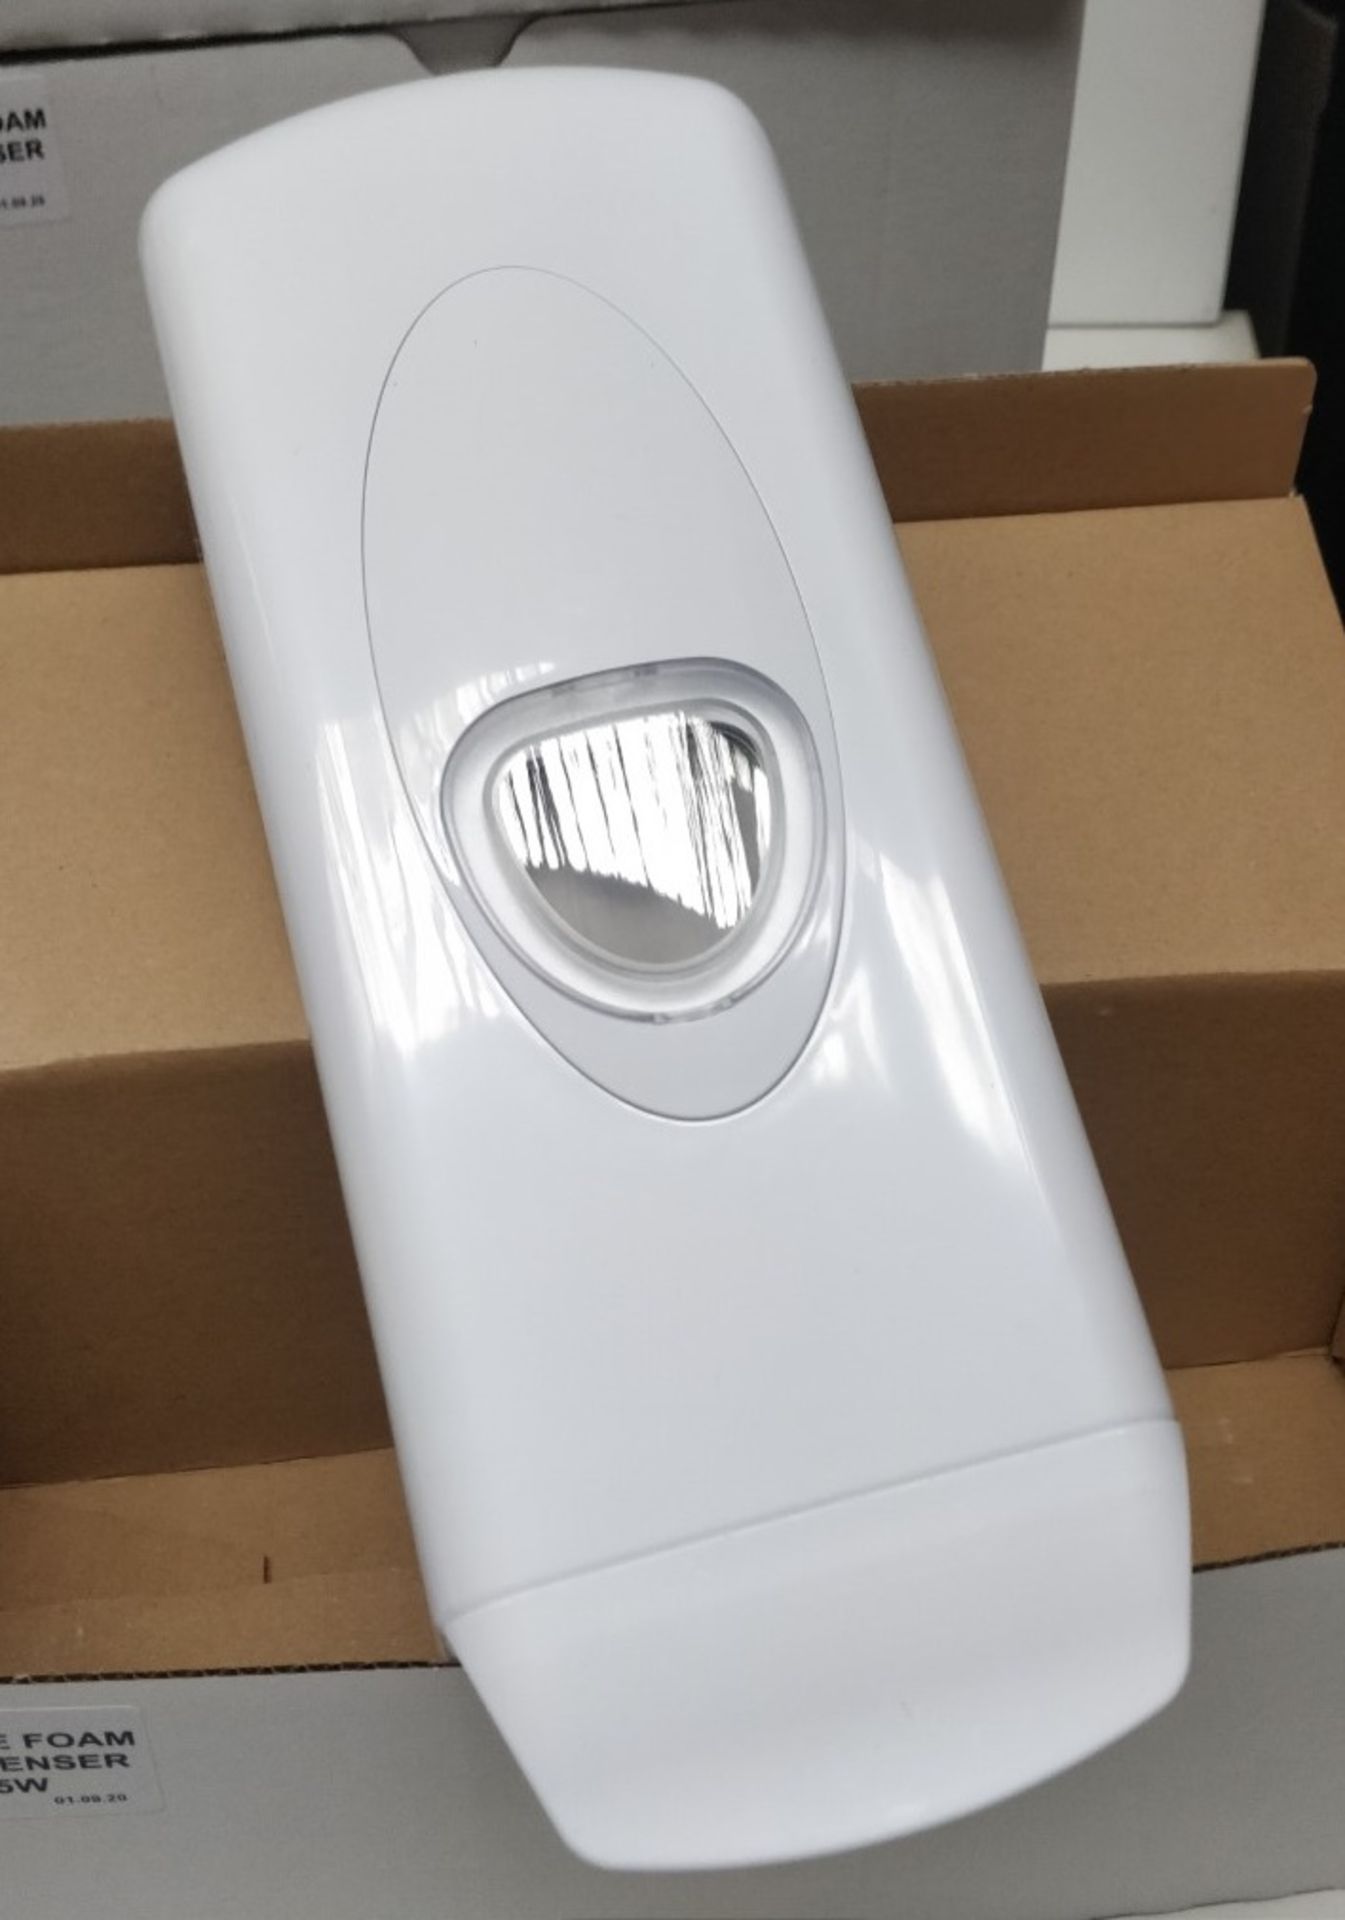 4 x Refillable Hand Soap Dispensers in White - Model BC 235W - Brand New and Boxed - Recently - Image 3 of 5